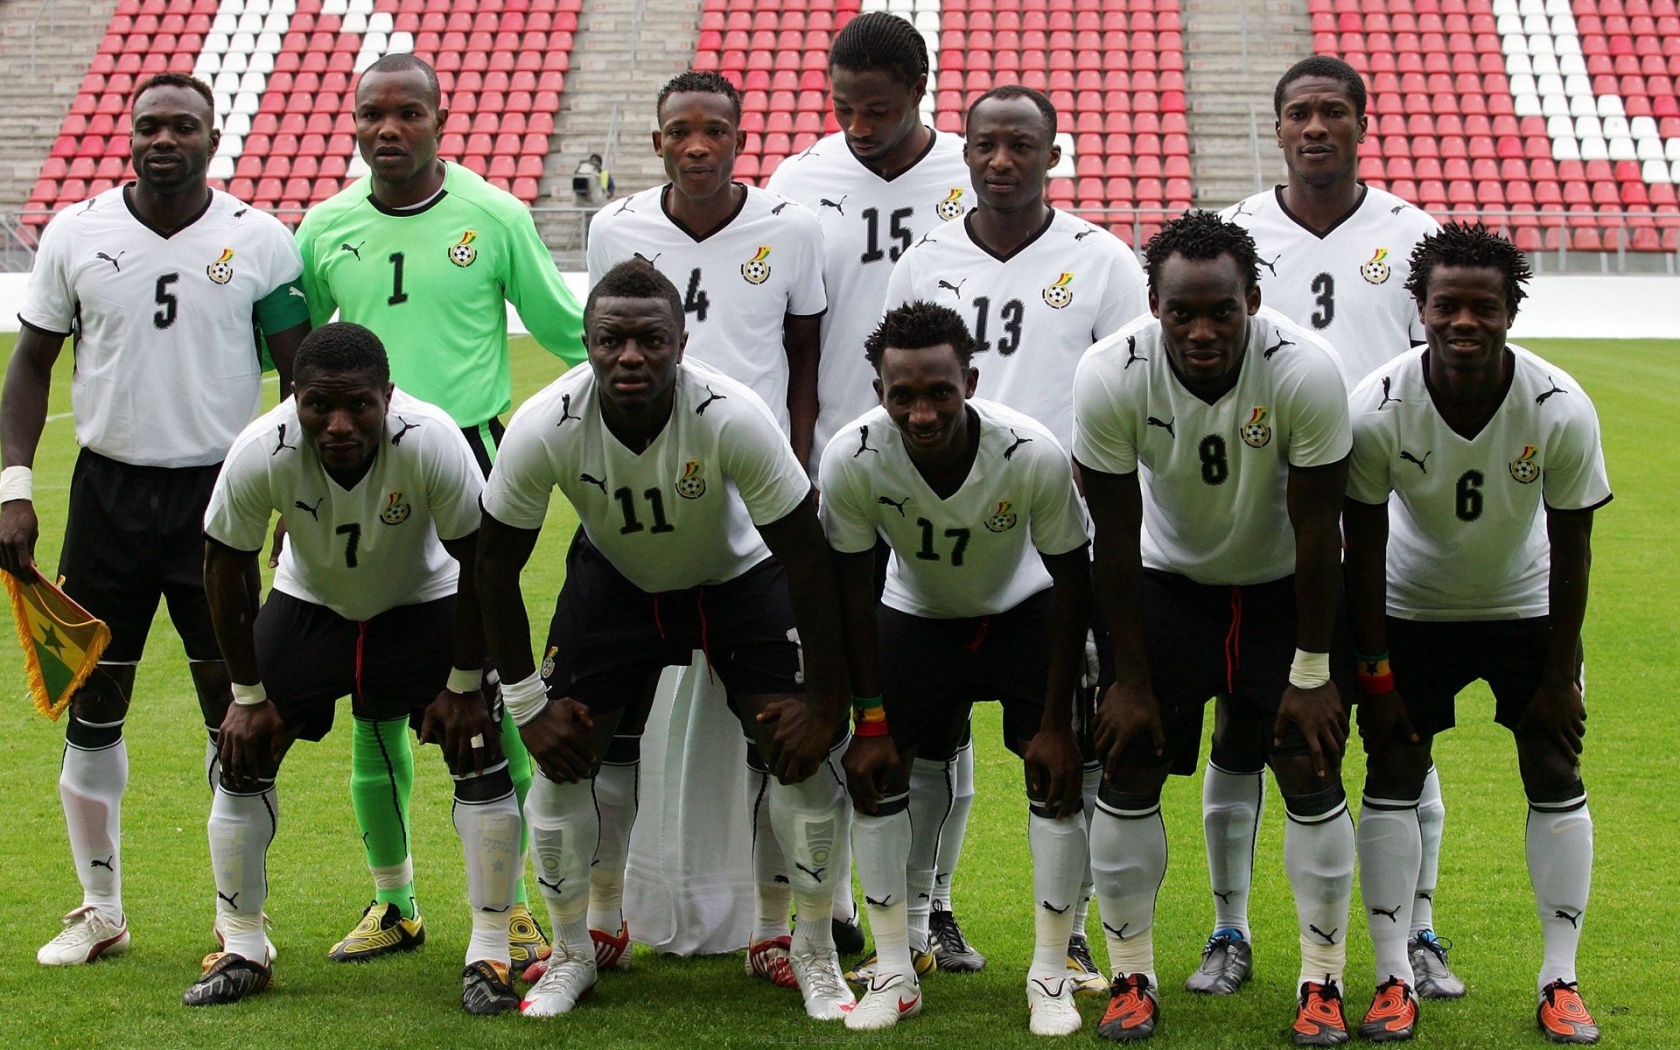 World Cup Ghana National Football Team Popularly Known As Black Stars